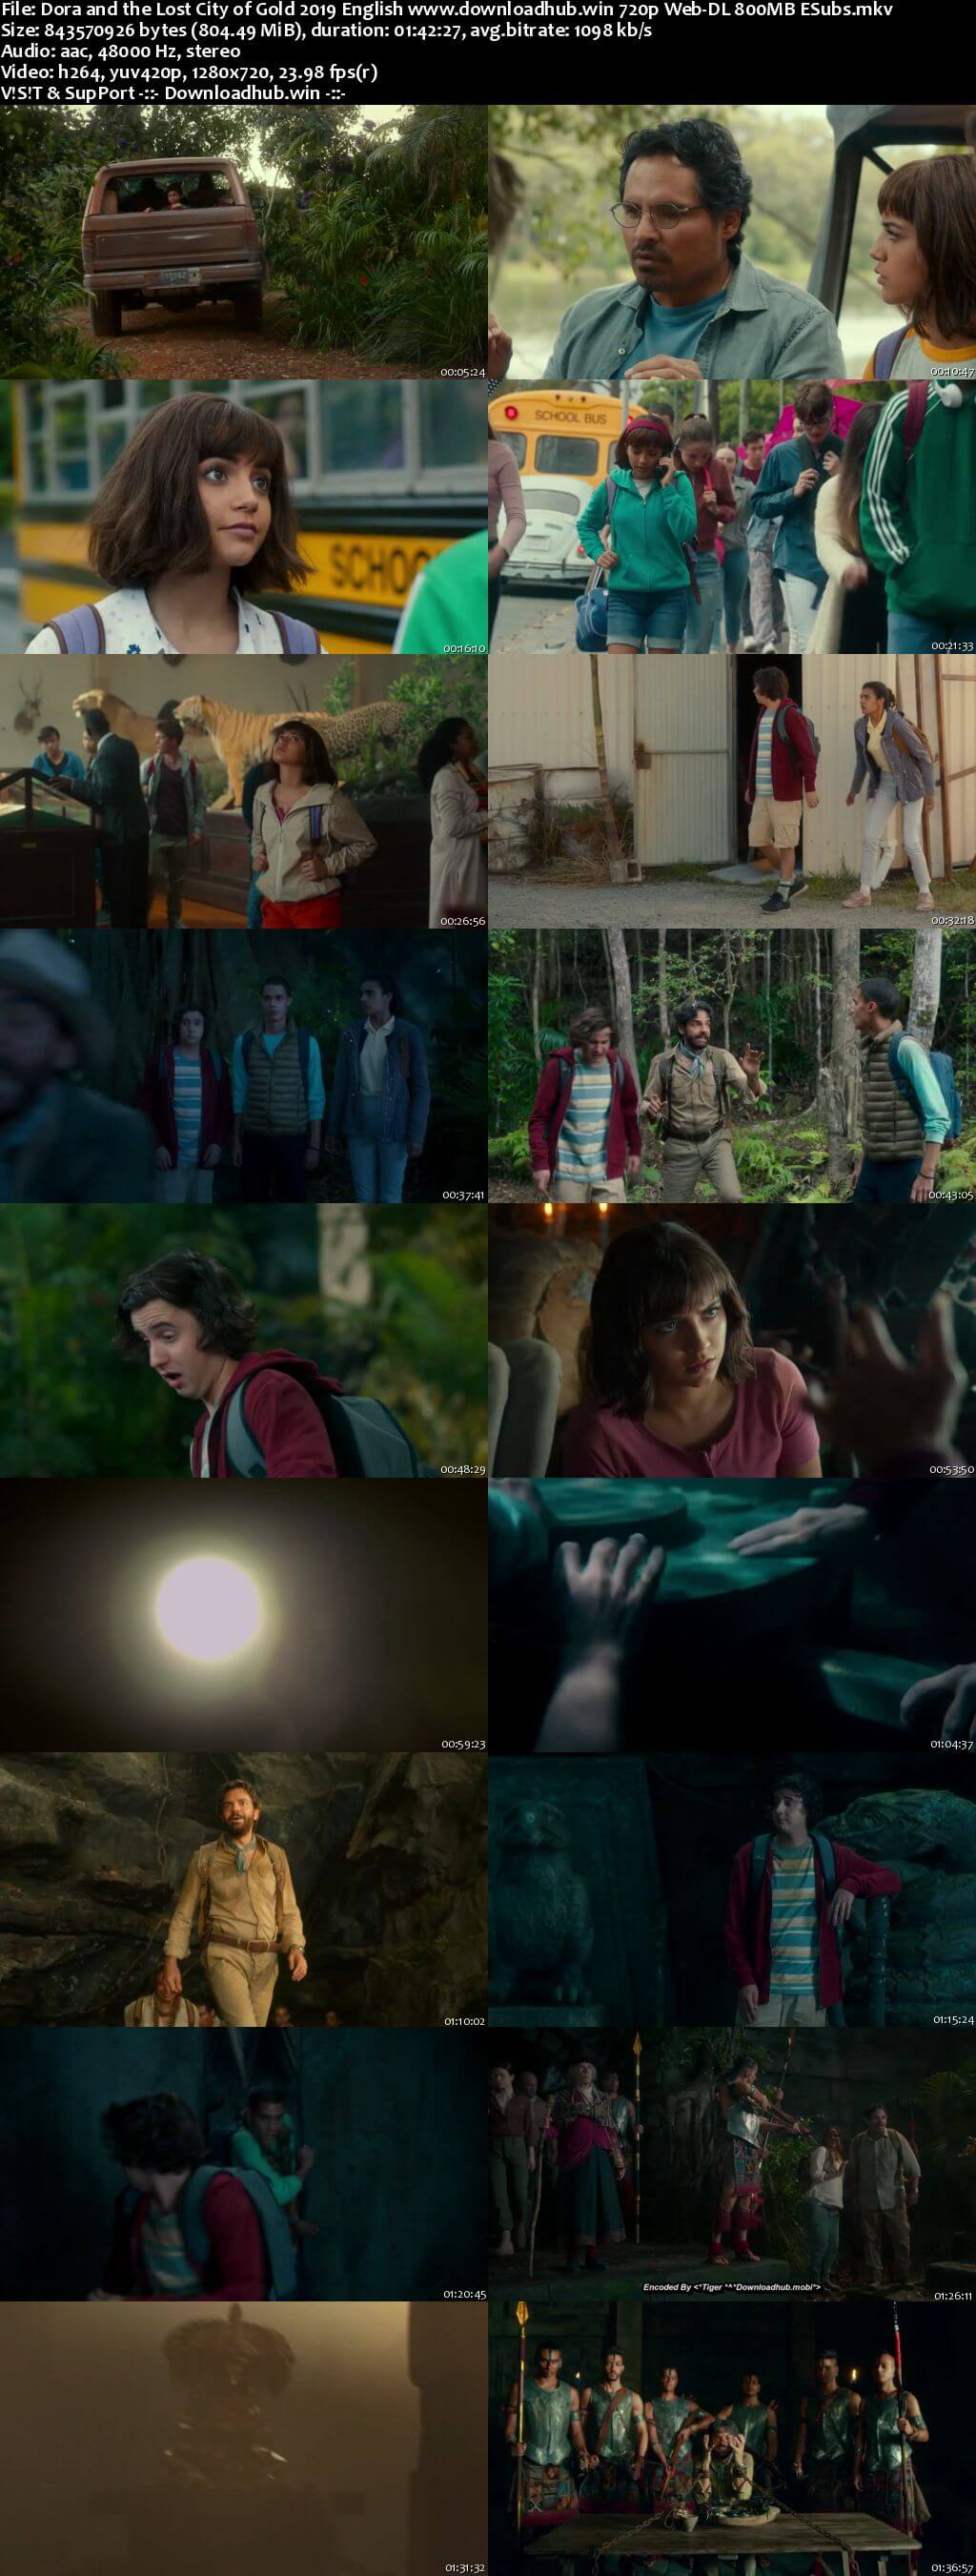 Dora and the Lost City of Gold 2019 English 720p Web-DL 800MB ESubs